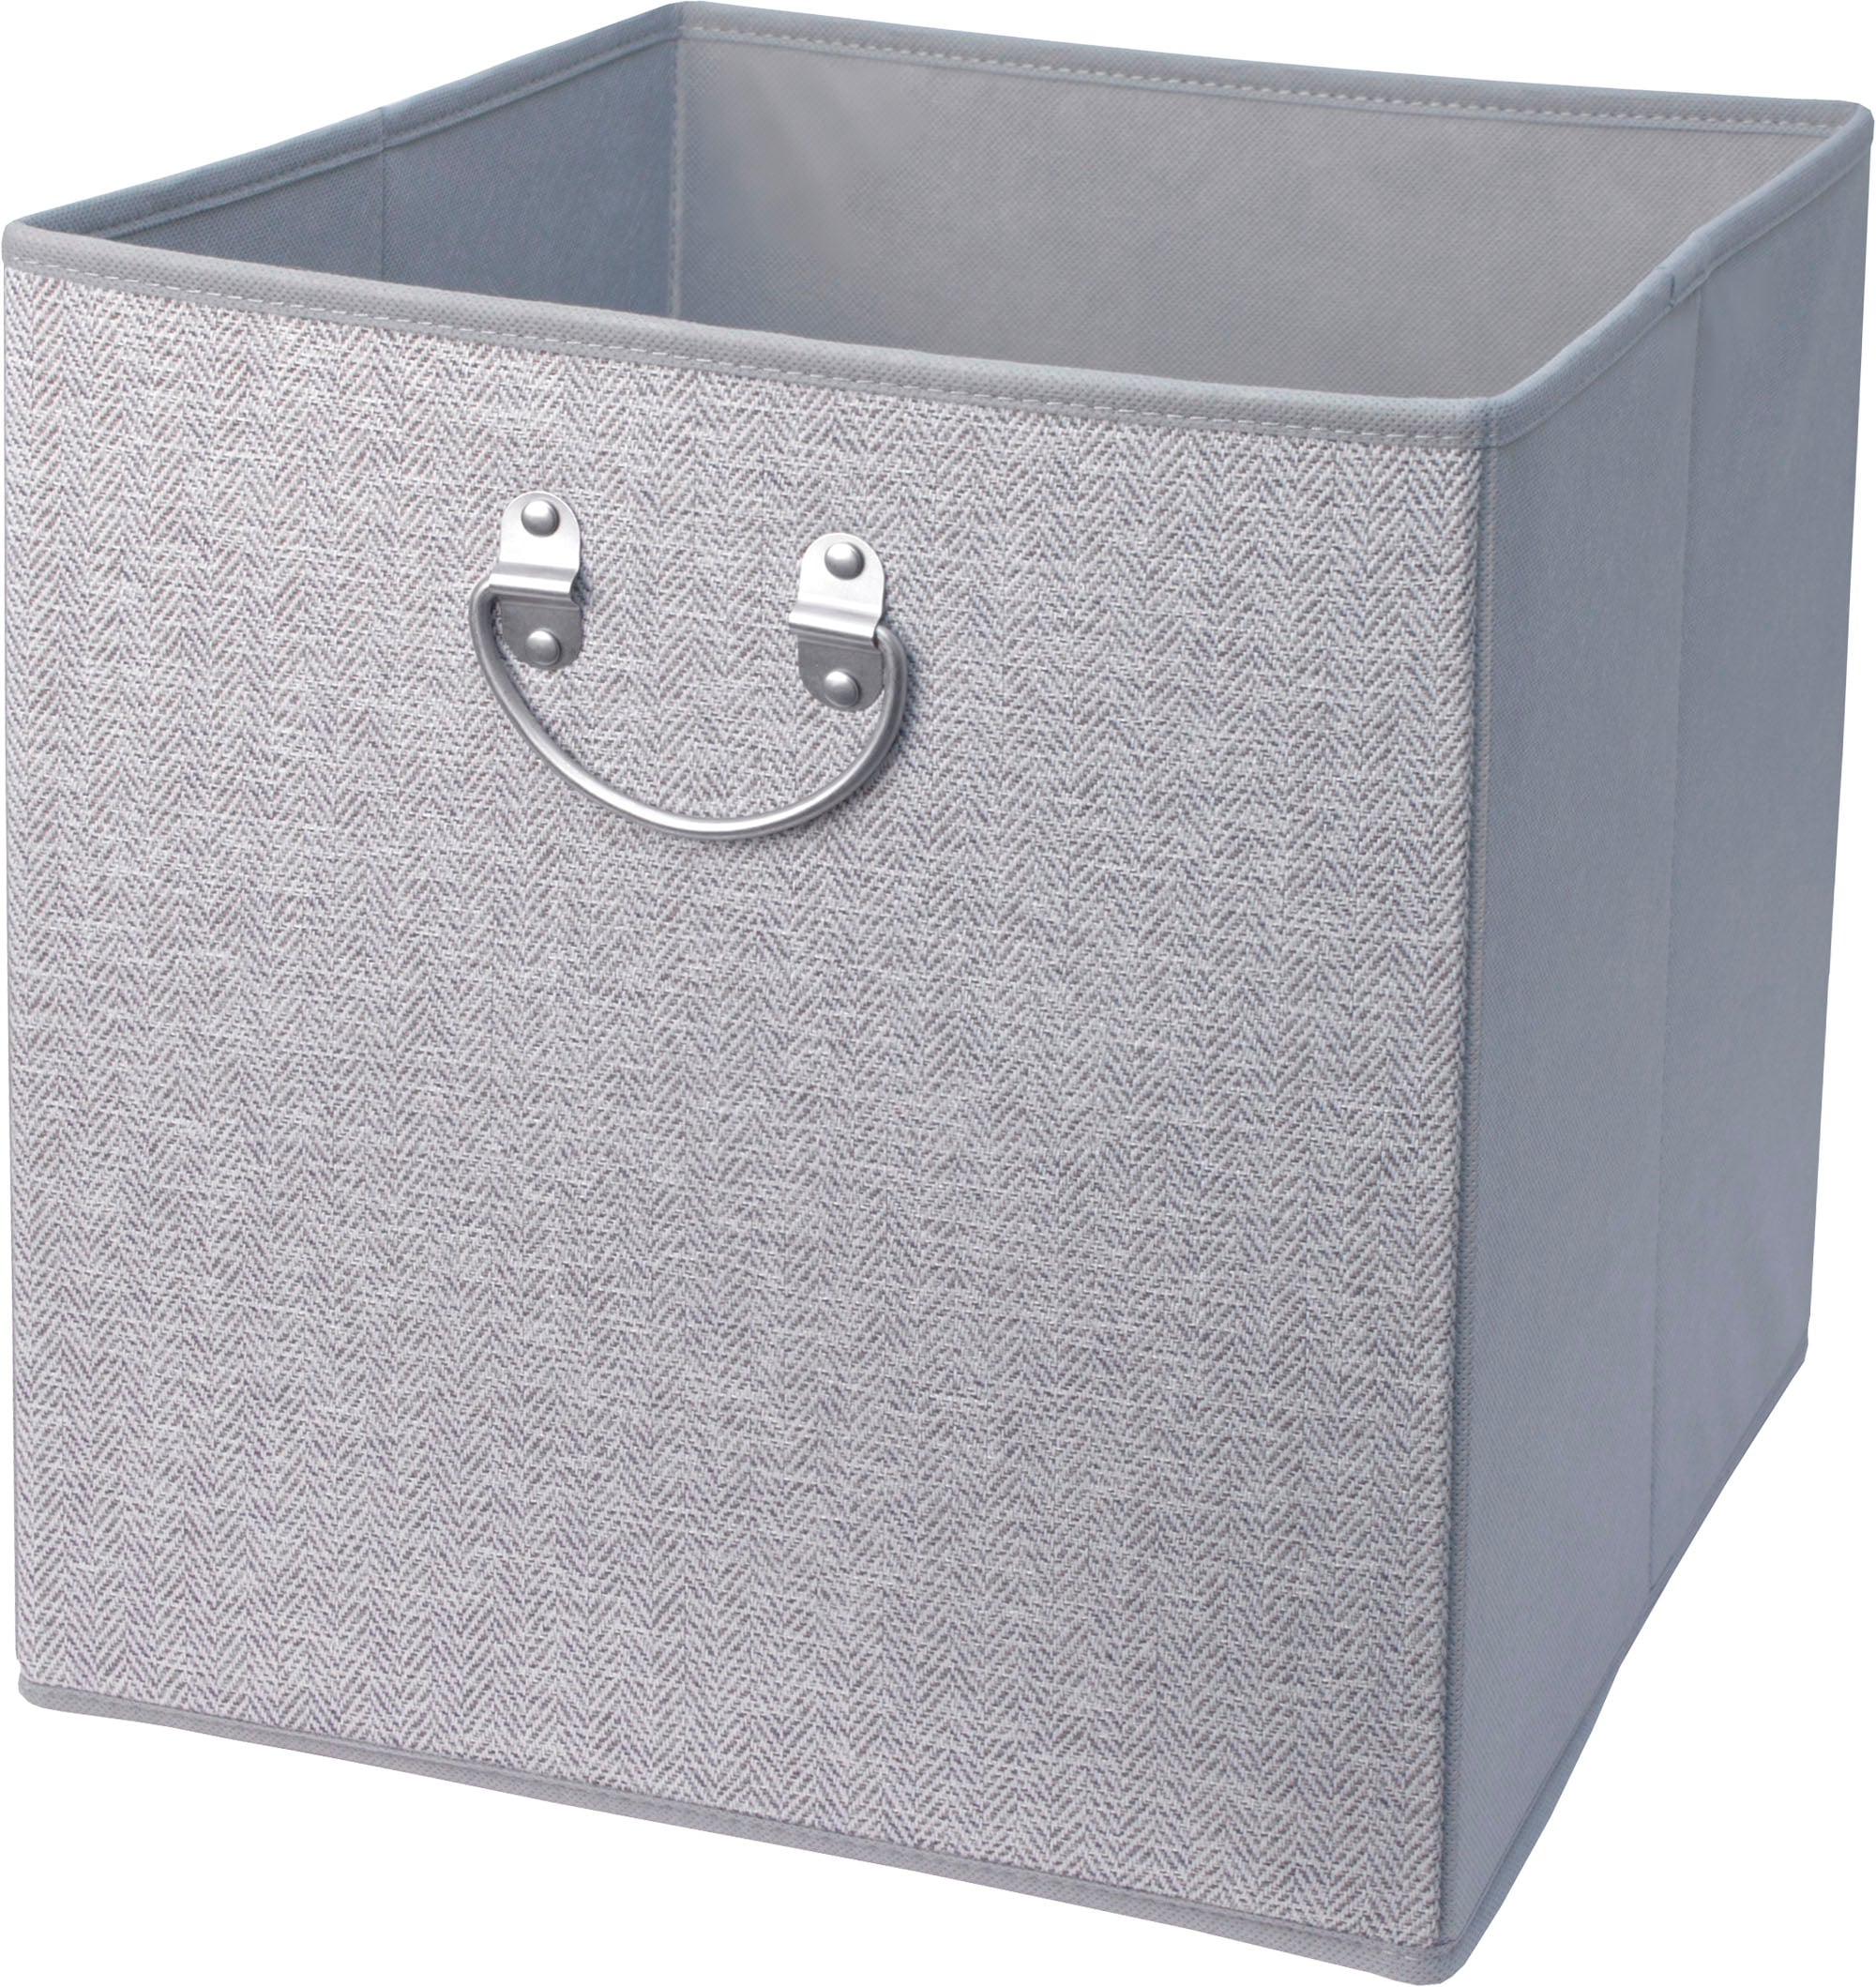 1-Pack Collapsible File Storage Organizer with Lid - Cream